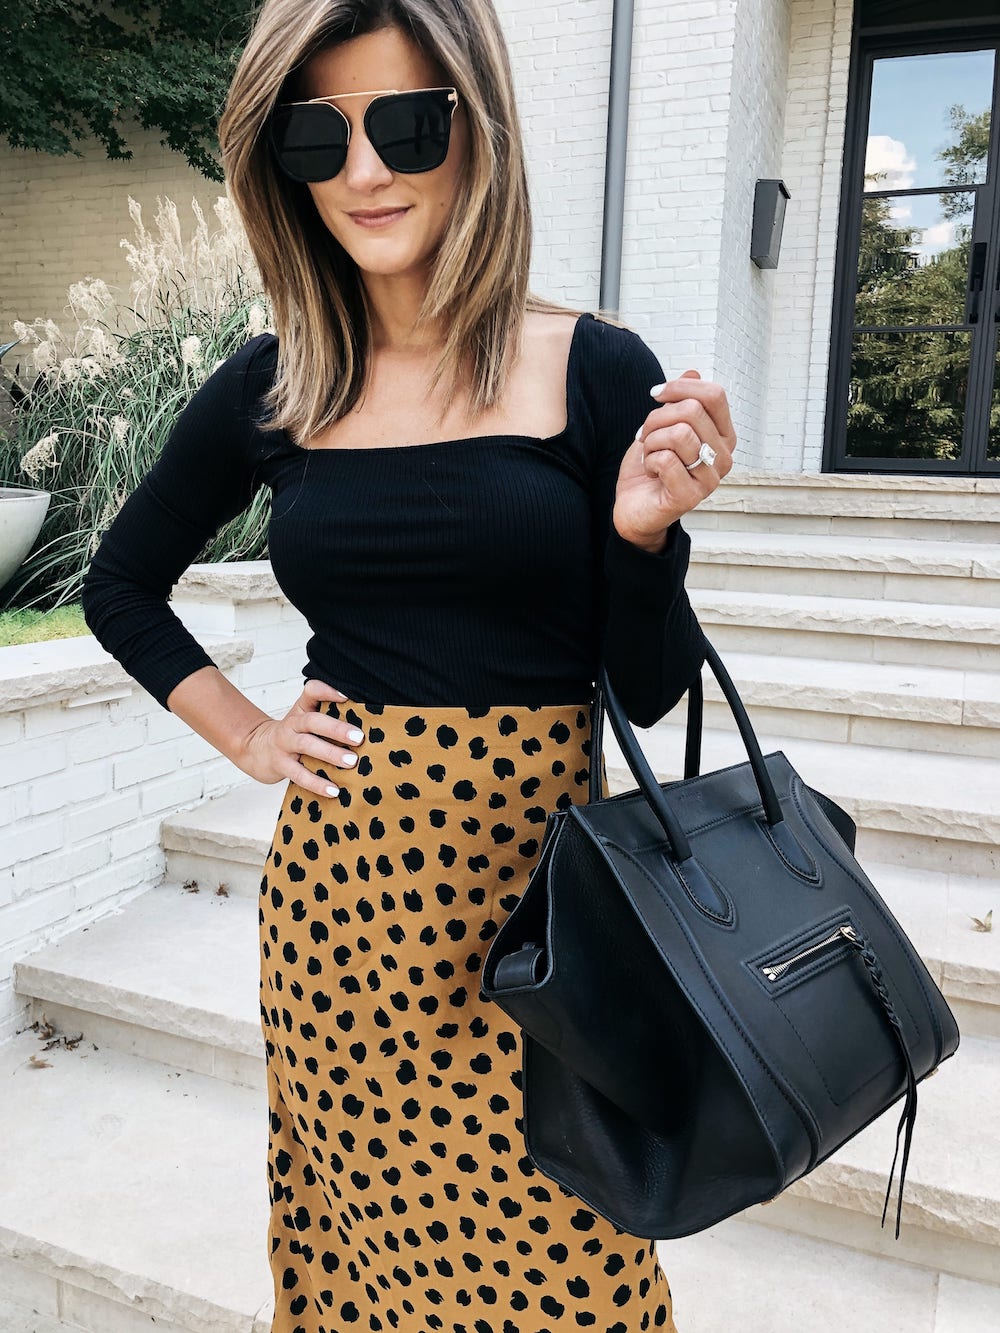 2019 Fashion Trends: Animal Print Style Finds for Fall